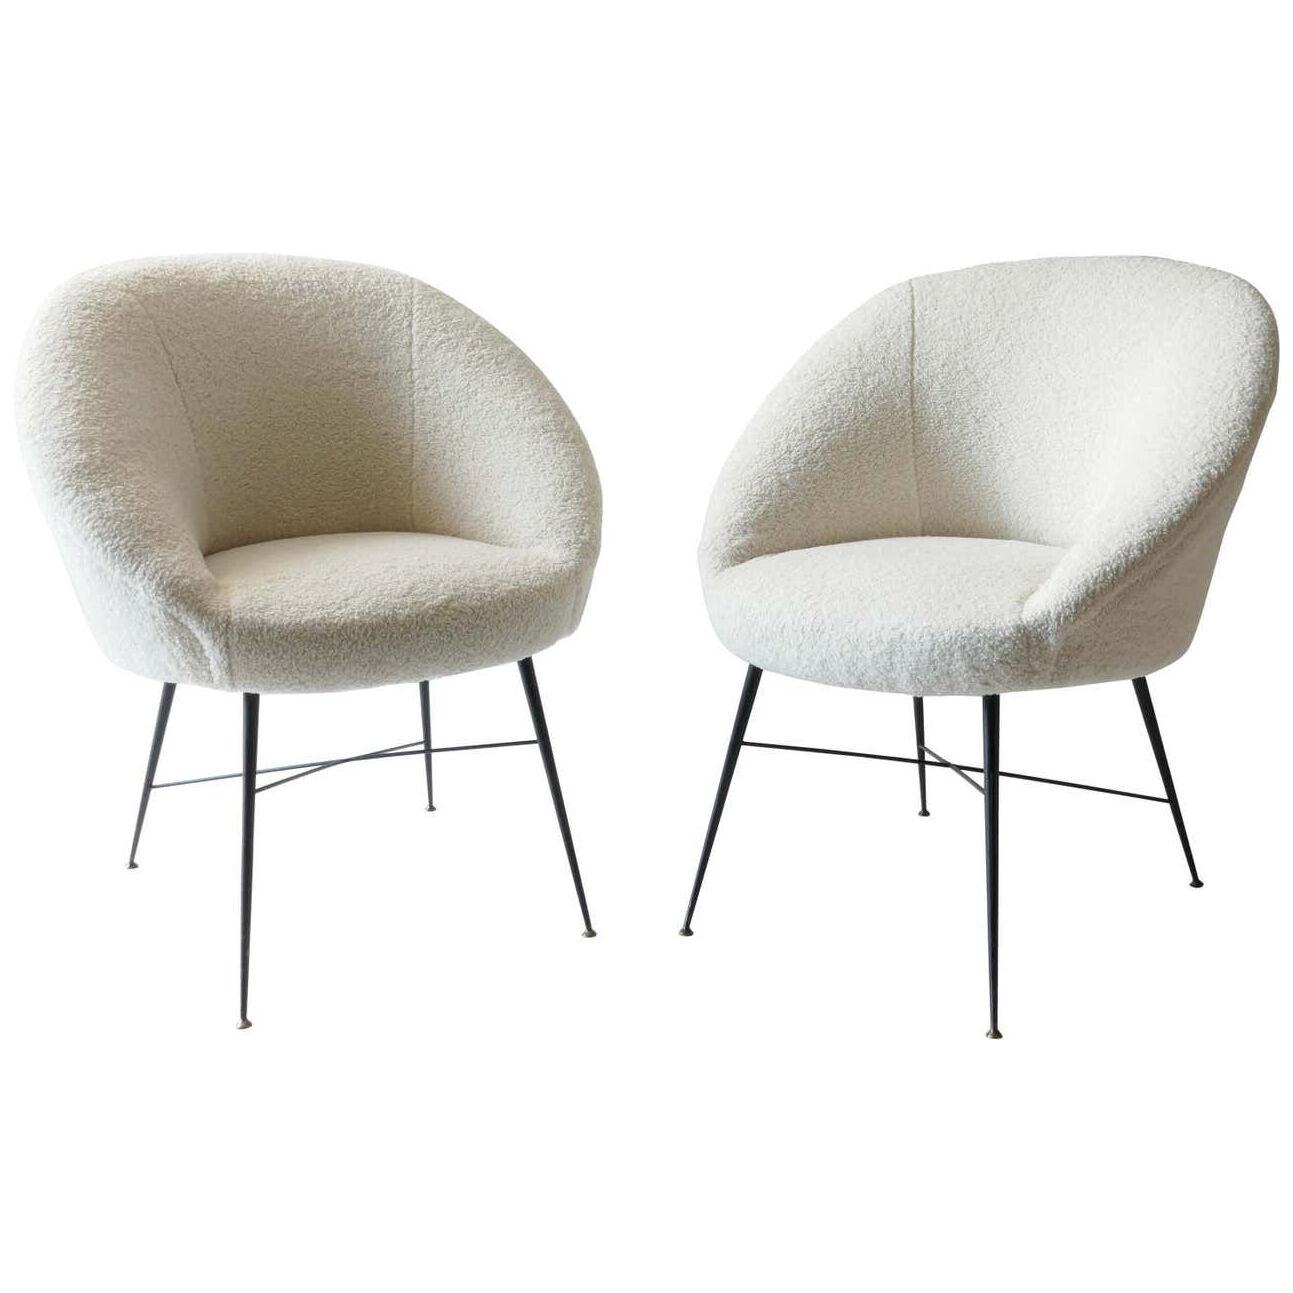 Pair of Lounge Chairs, Black Metal Legs and White Boucle Fabric, Italy, 1950s